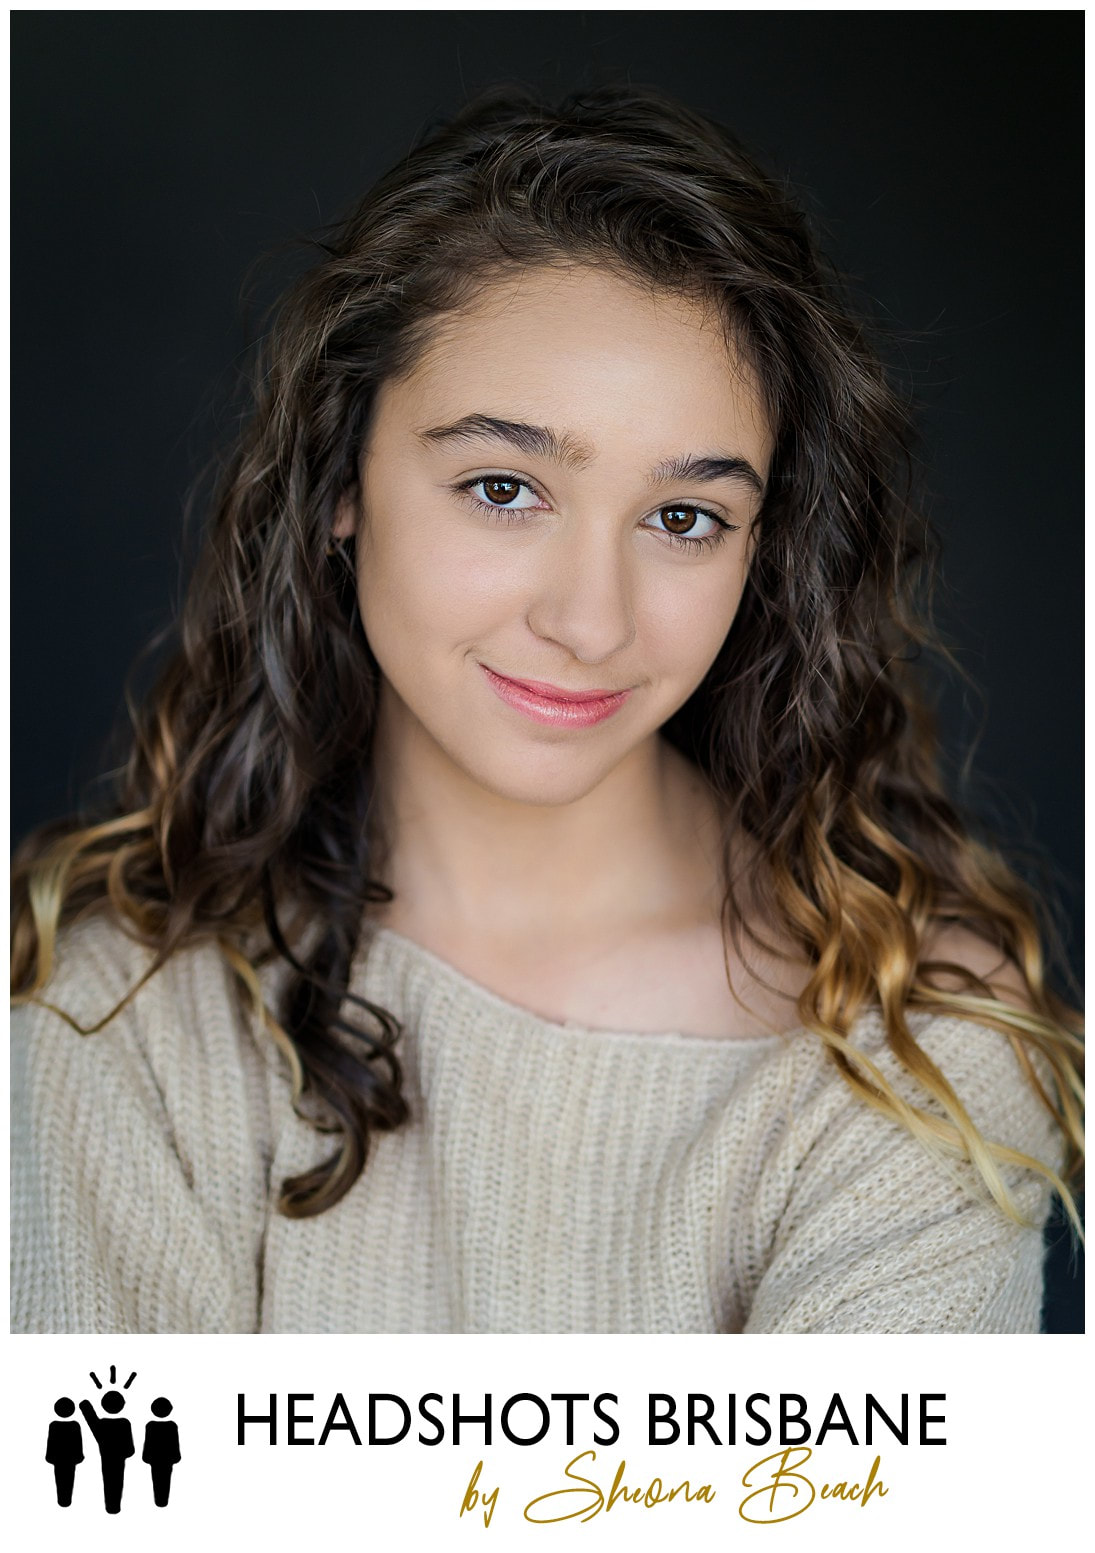 Ebonie's actor headshot from her session today.